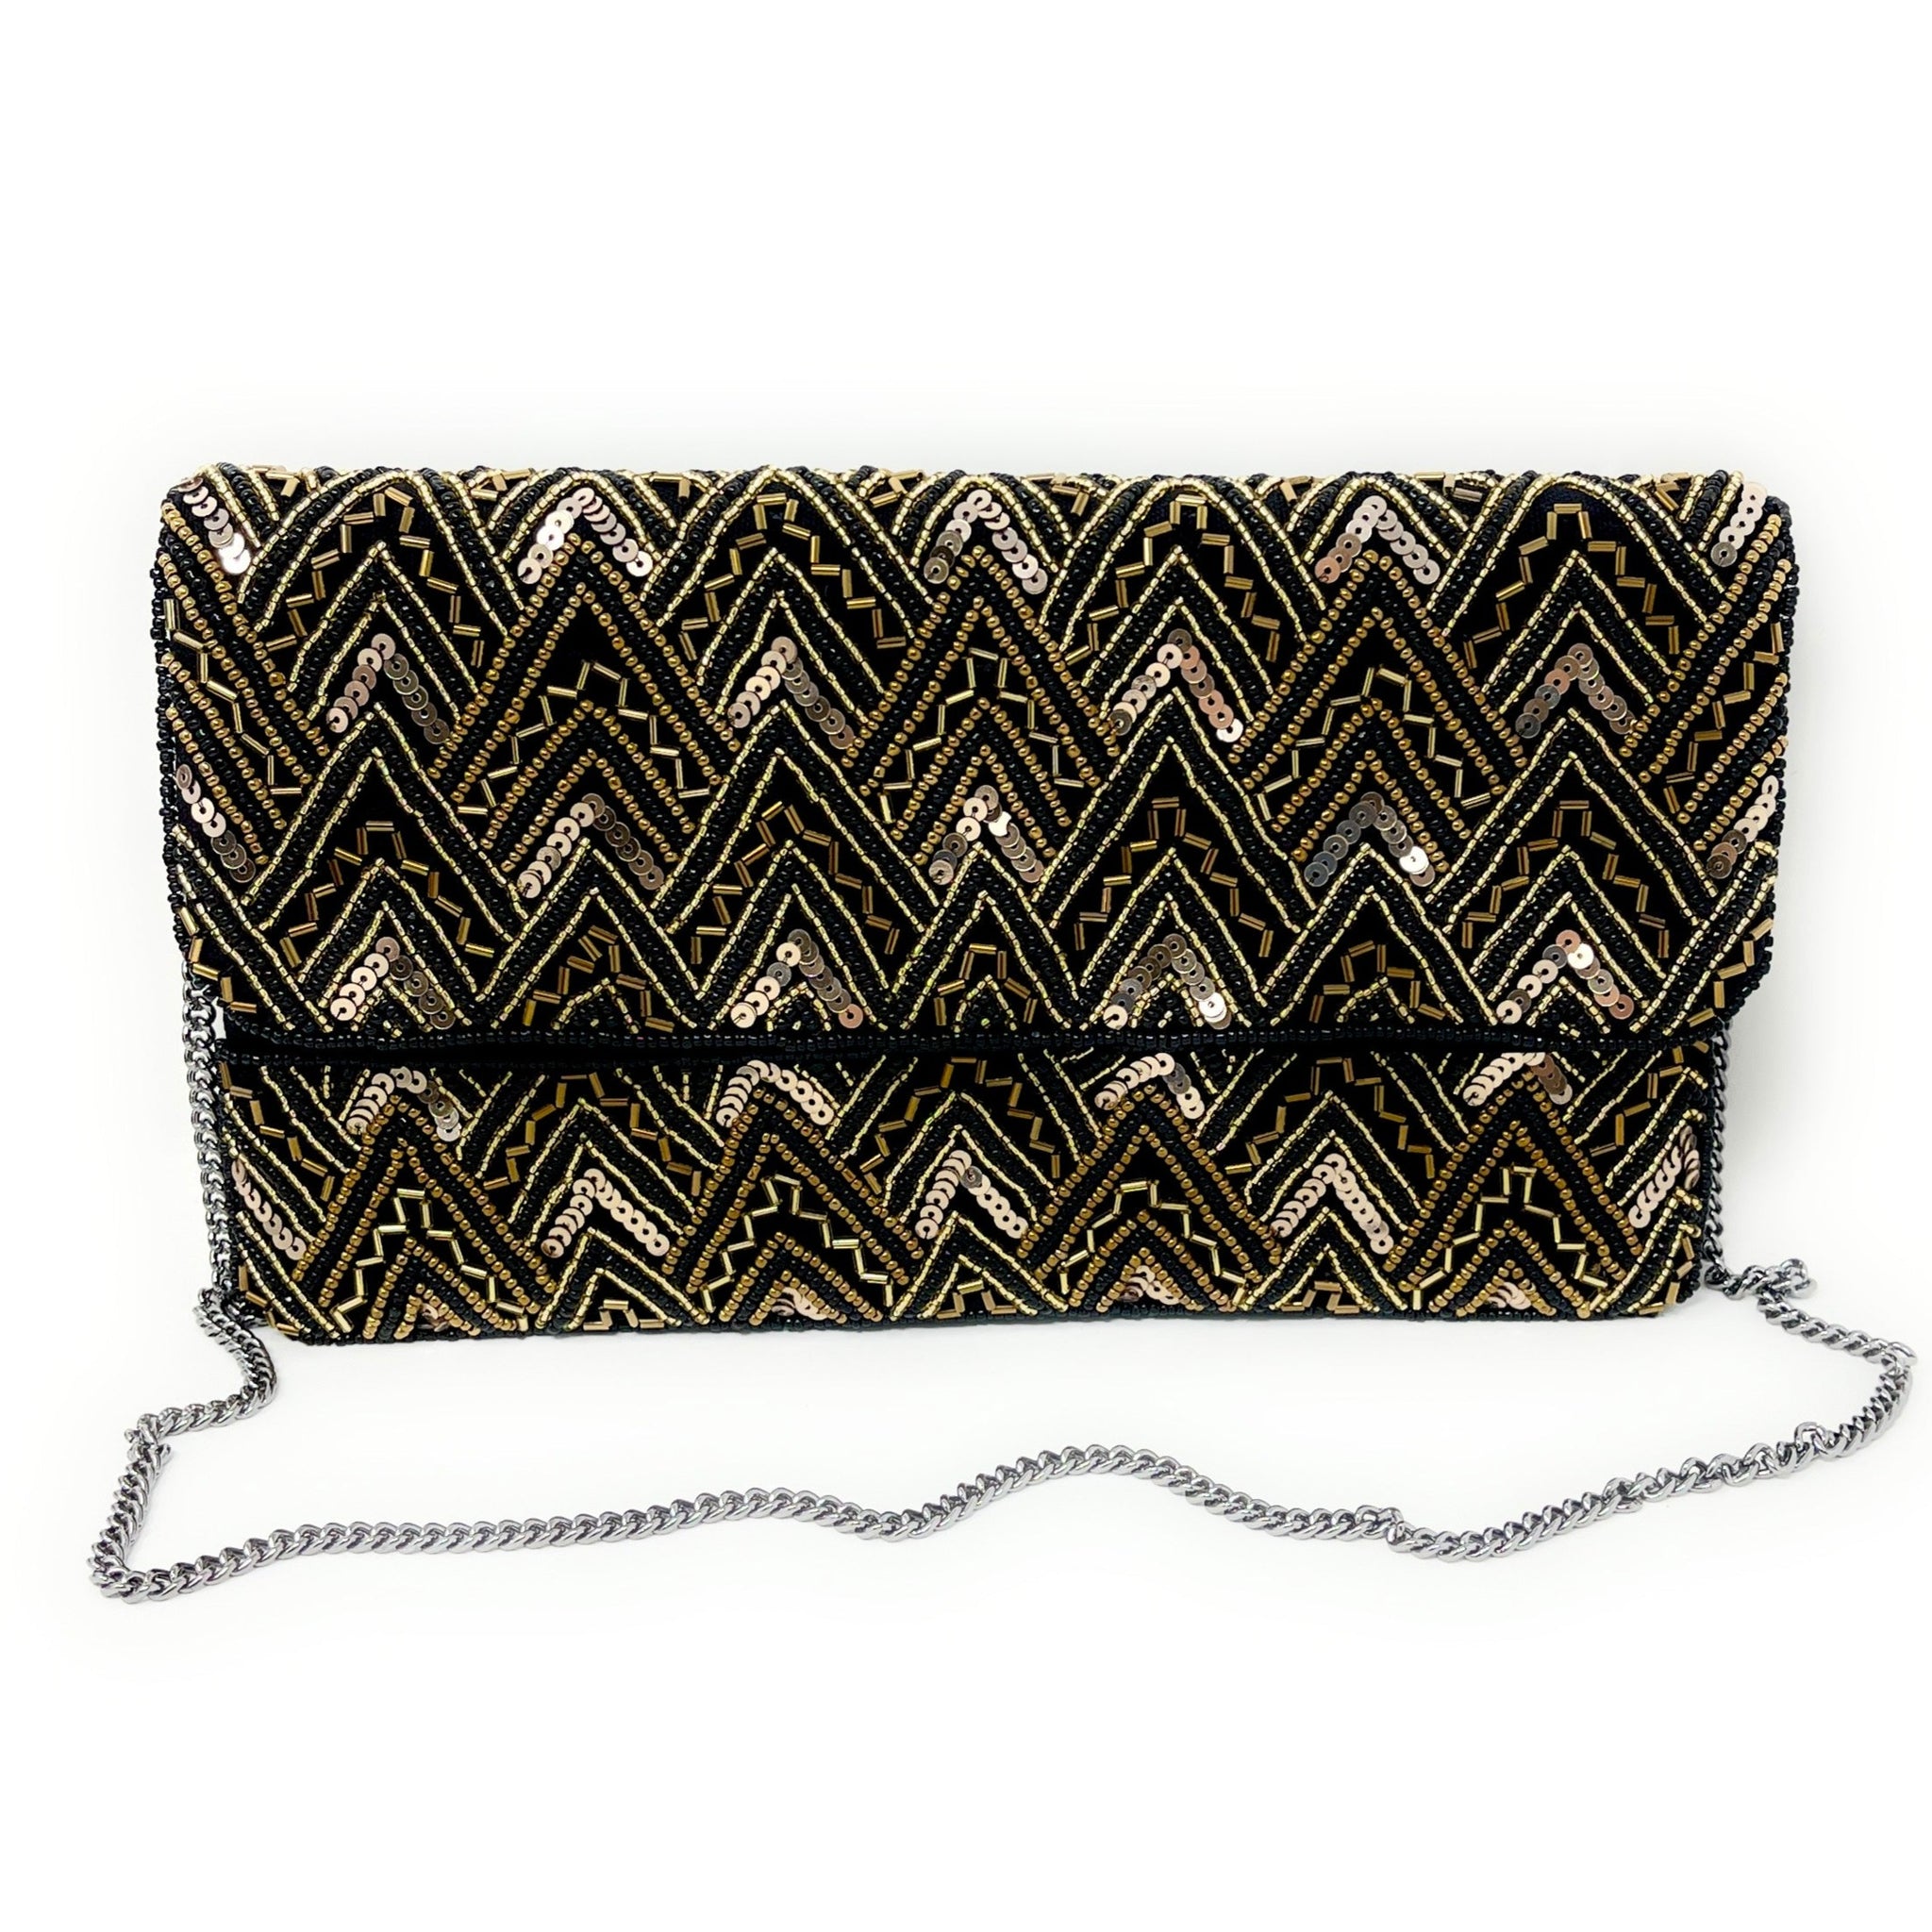 Trendy and Fashionable women's clutch Black